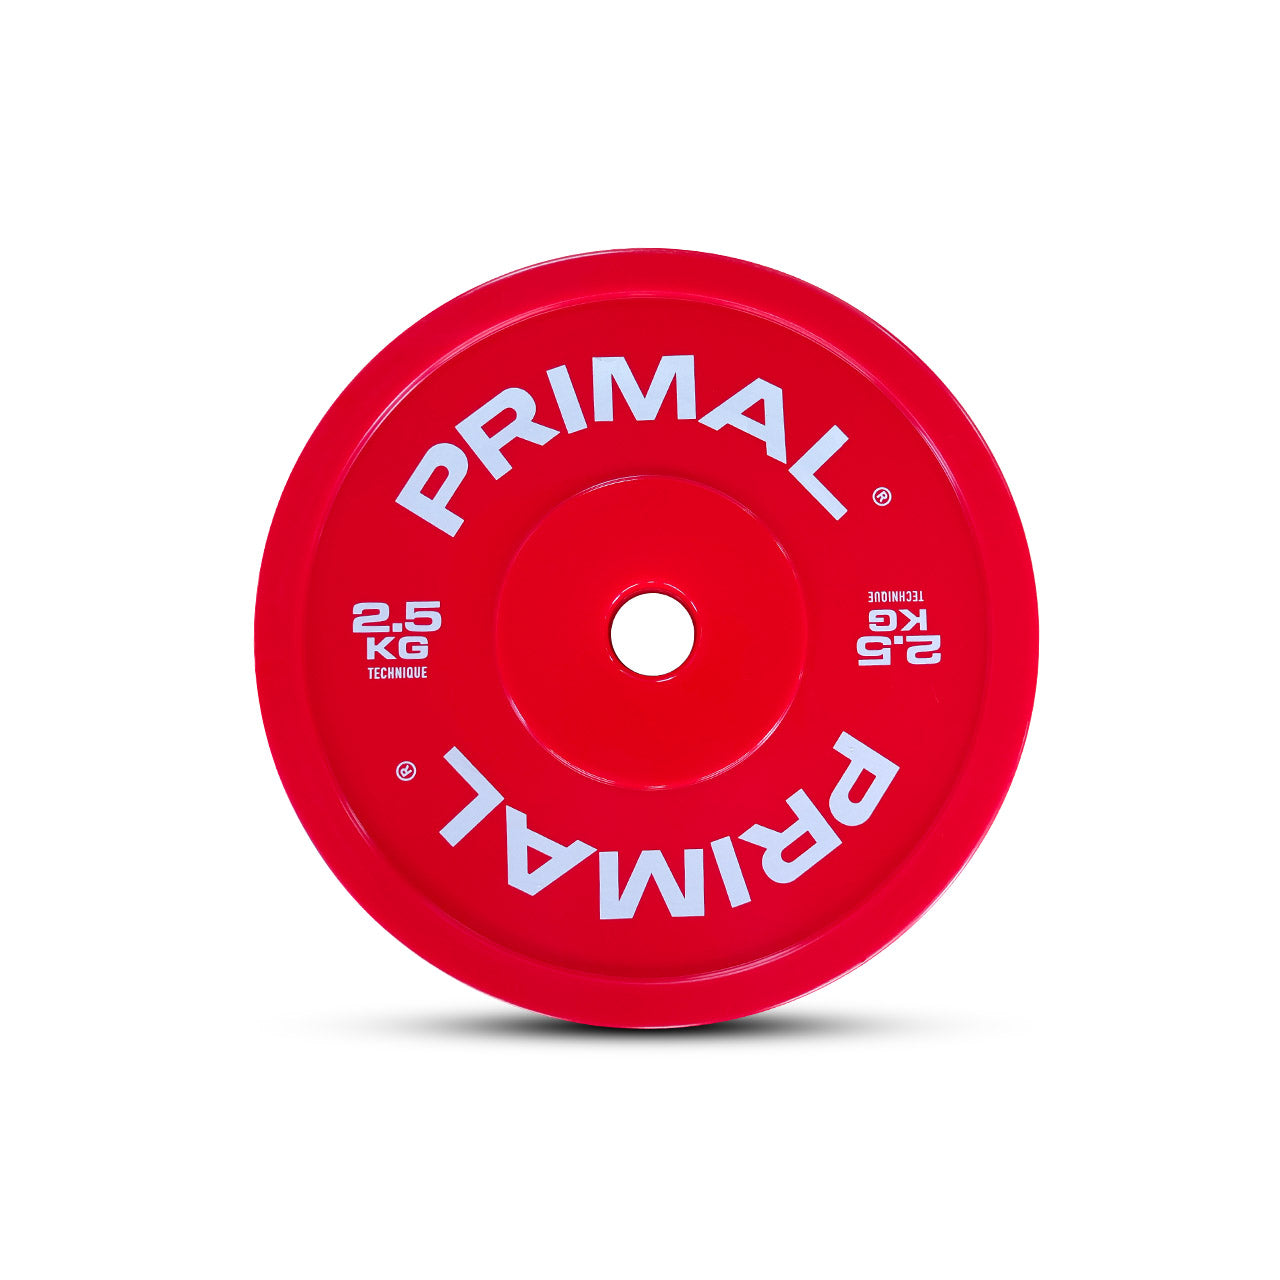 Primal Performance Series Technique Weight Plate - 2.5kg – Primal Strength